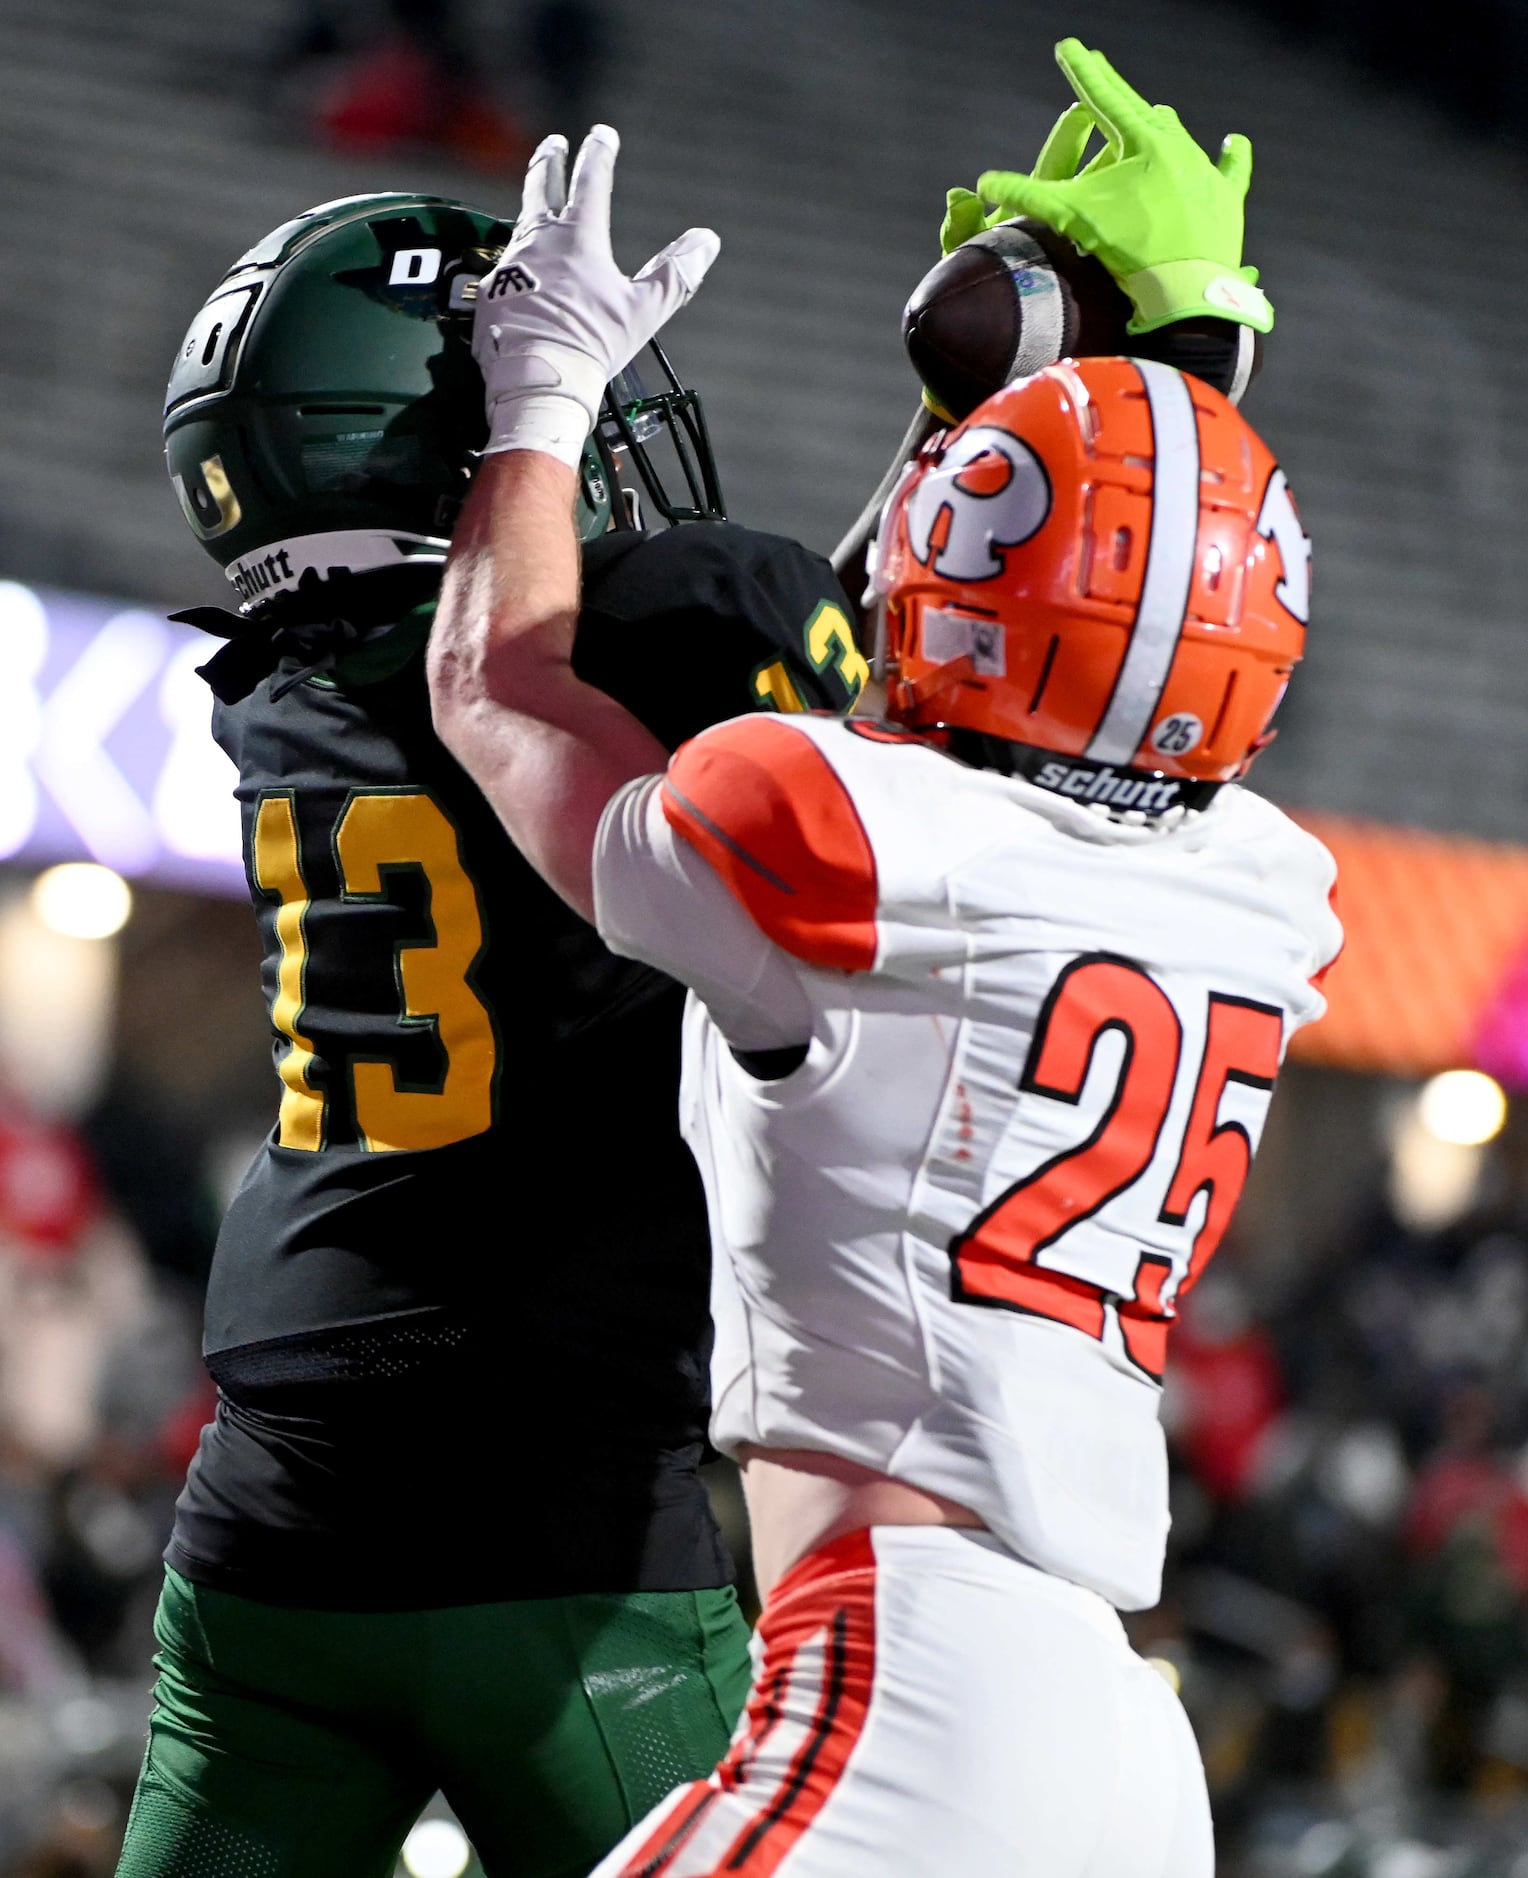 DeSoto’s Johntay Cook II (13) makes the game-winning catch over Rockwall’s Corey Kelley in...